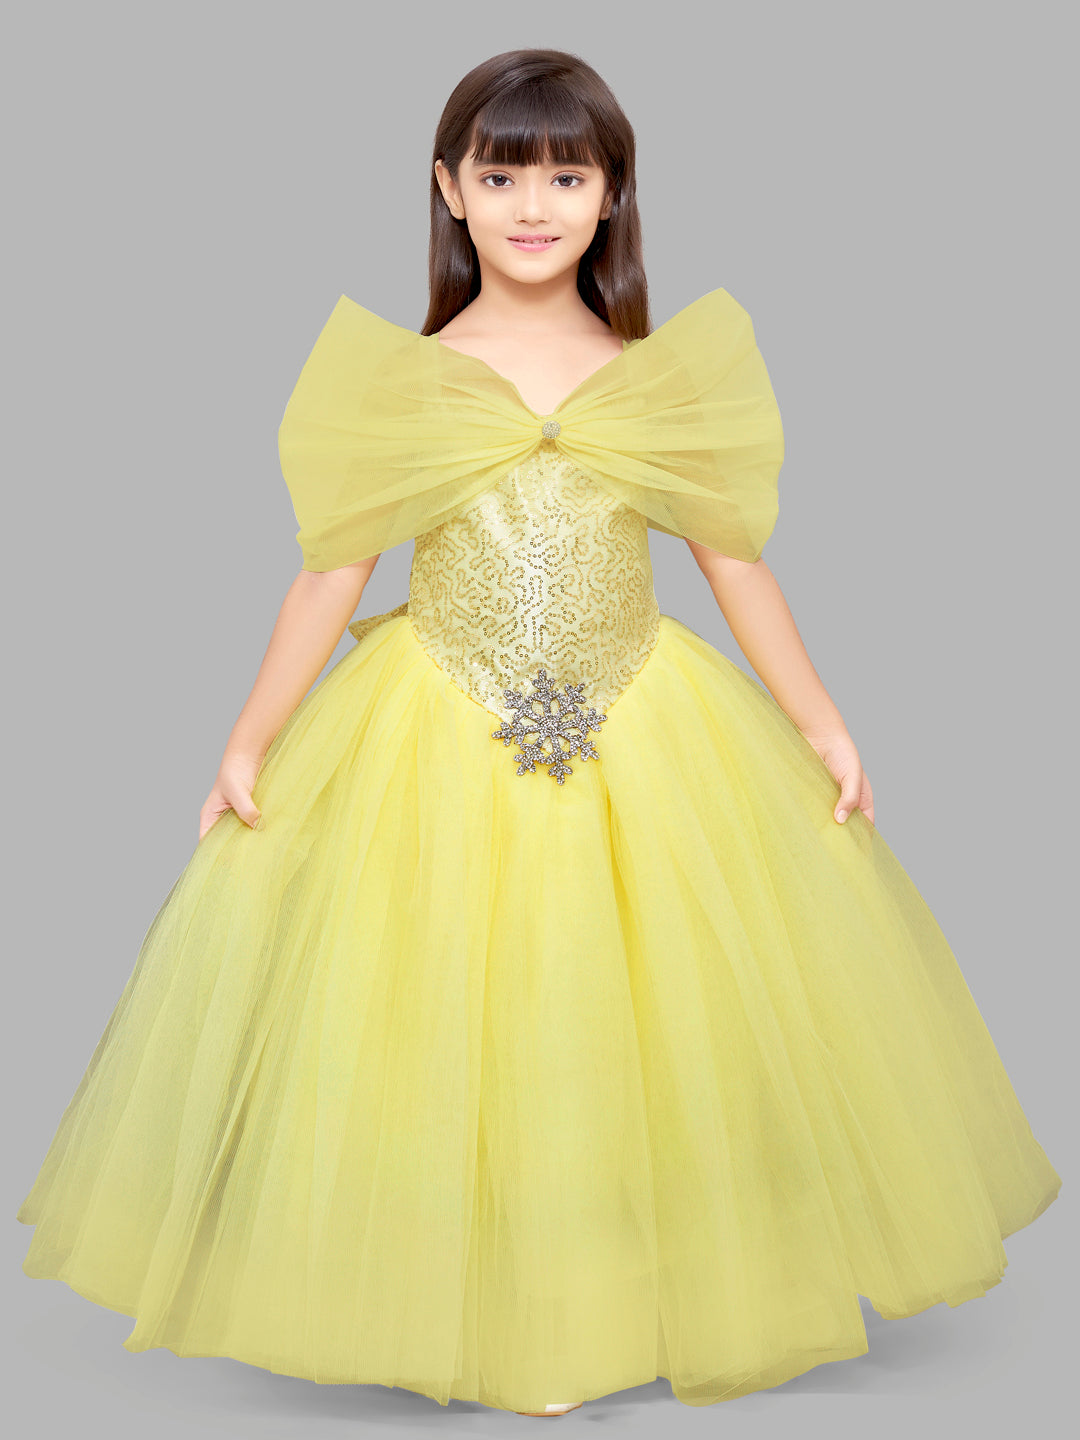 Yellow Princess Gown  Etsy